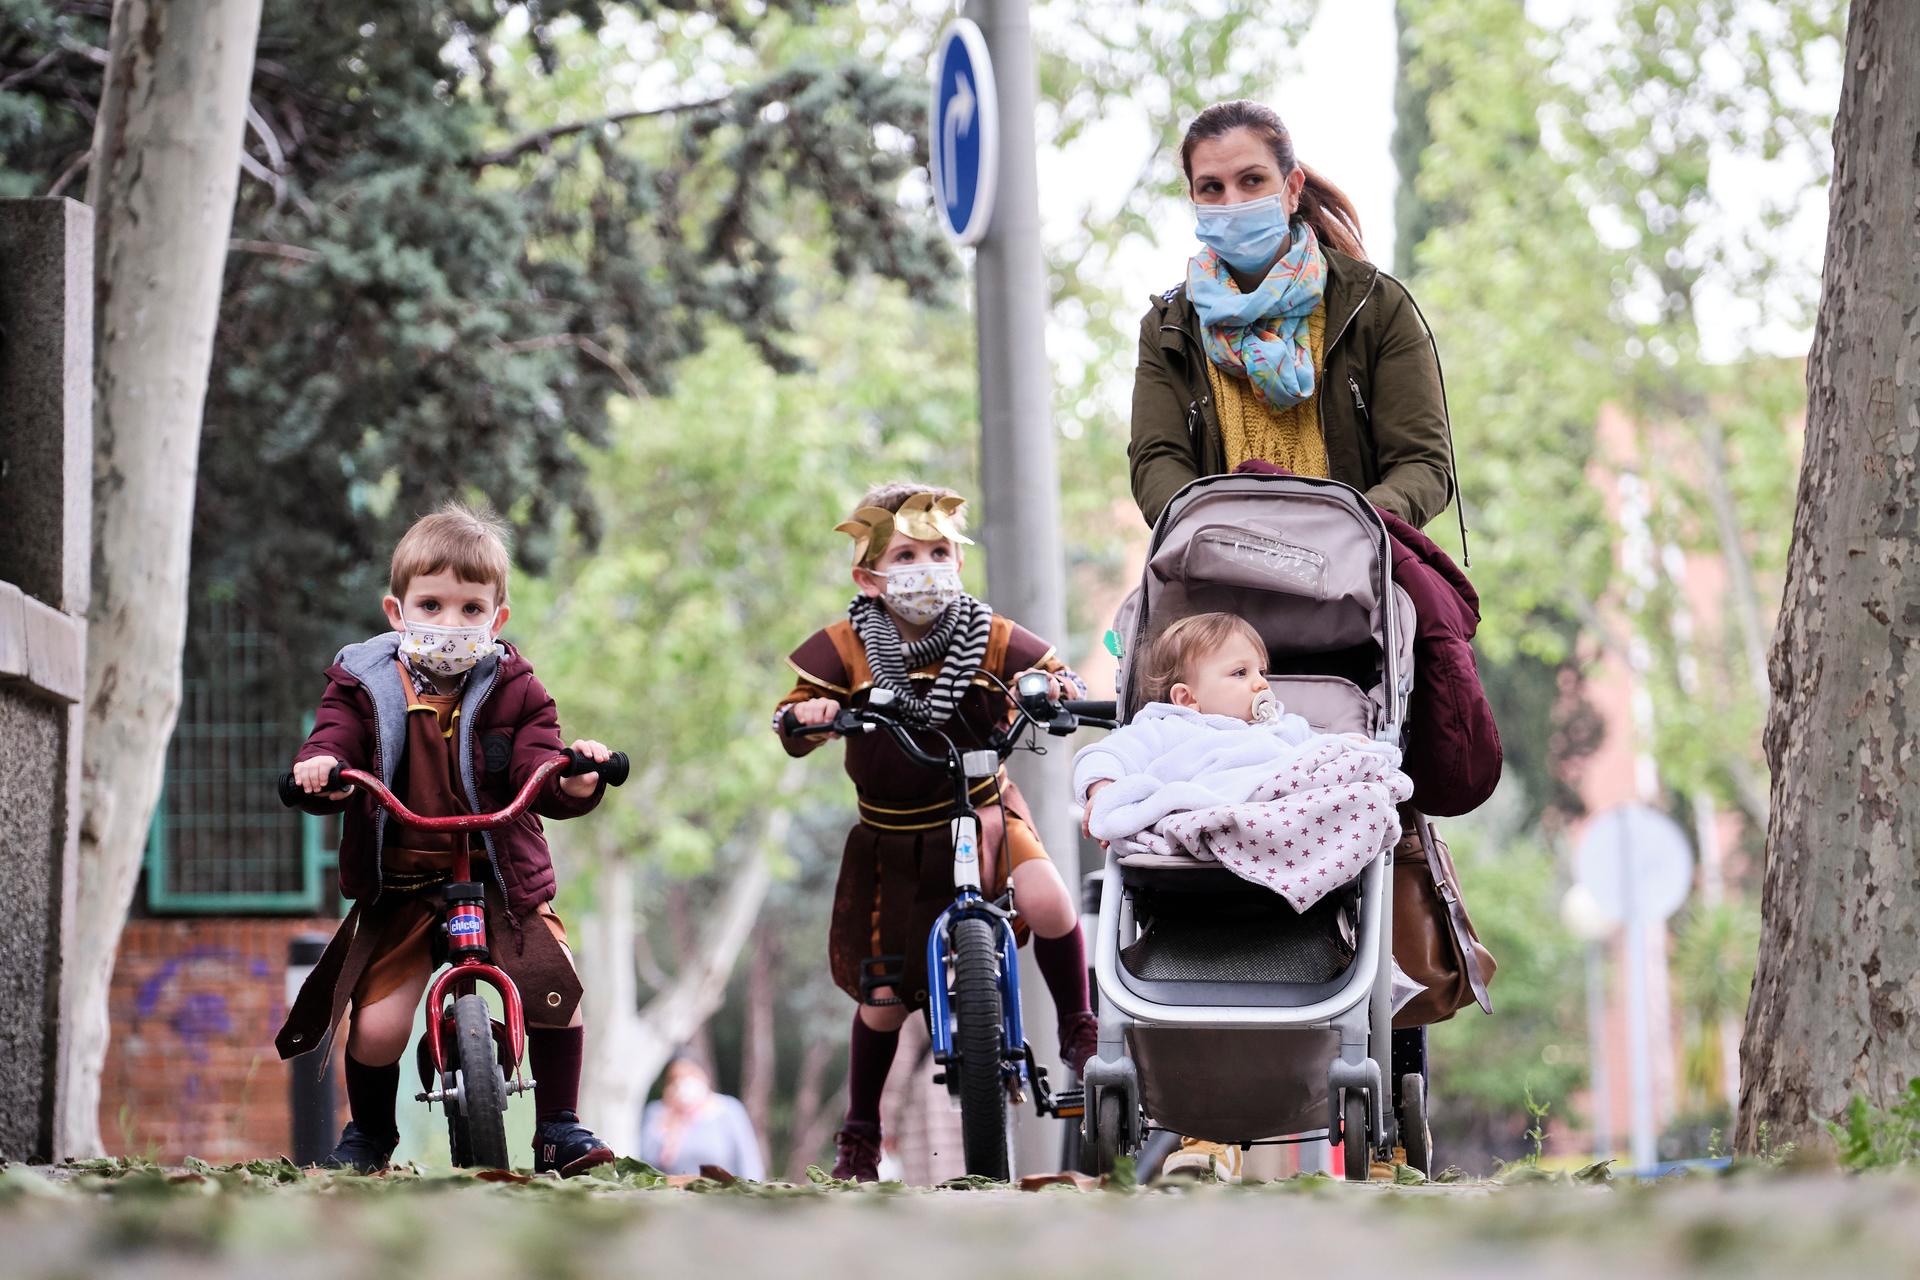 Begoña, a mother of three, takes her children for a walk on the day Spain lifts restrictions on children outdoors due to the coronavirus pandemic